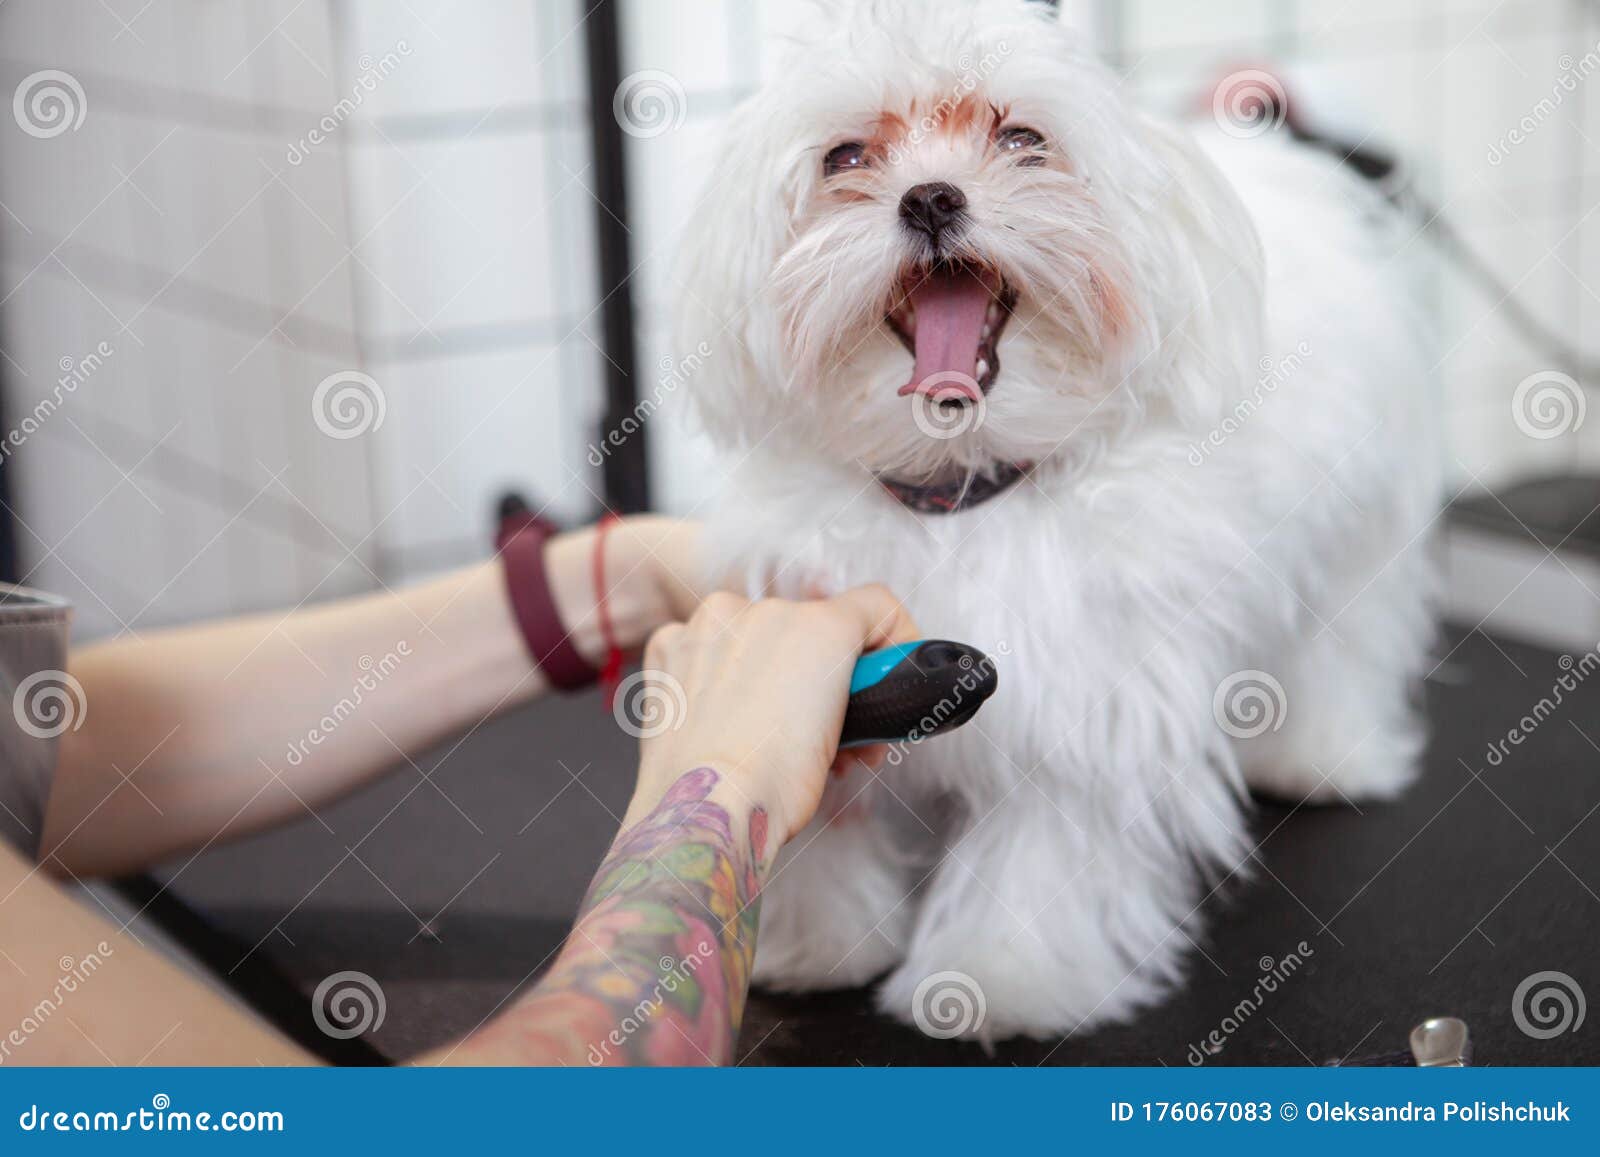 Cute Happy Little Dog At Grooming Salon Stock Image